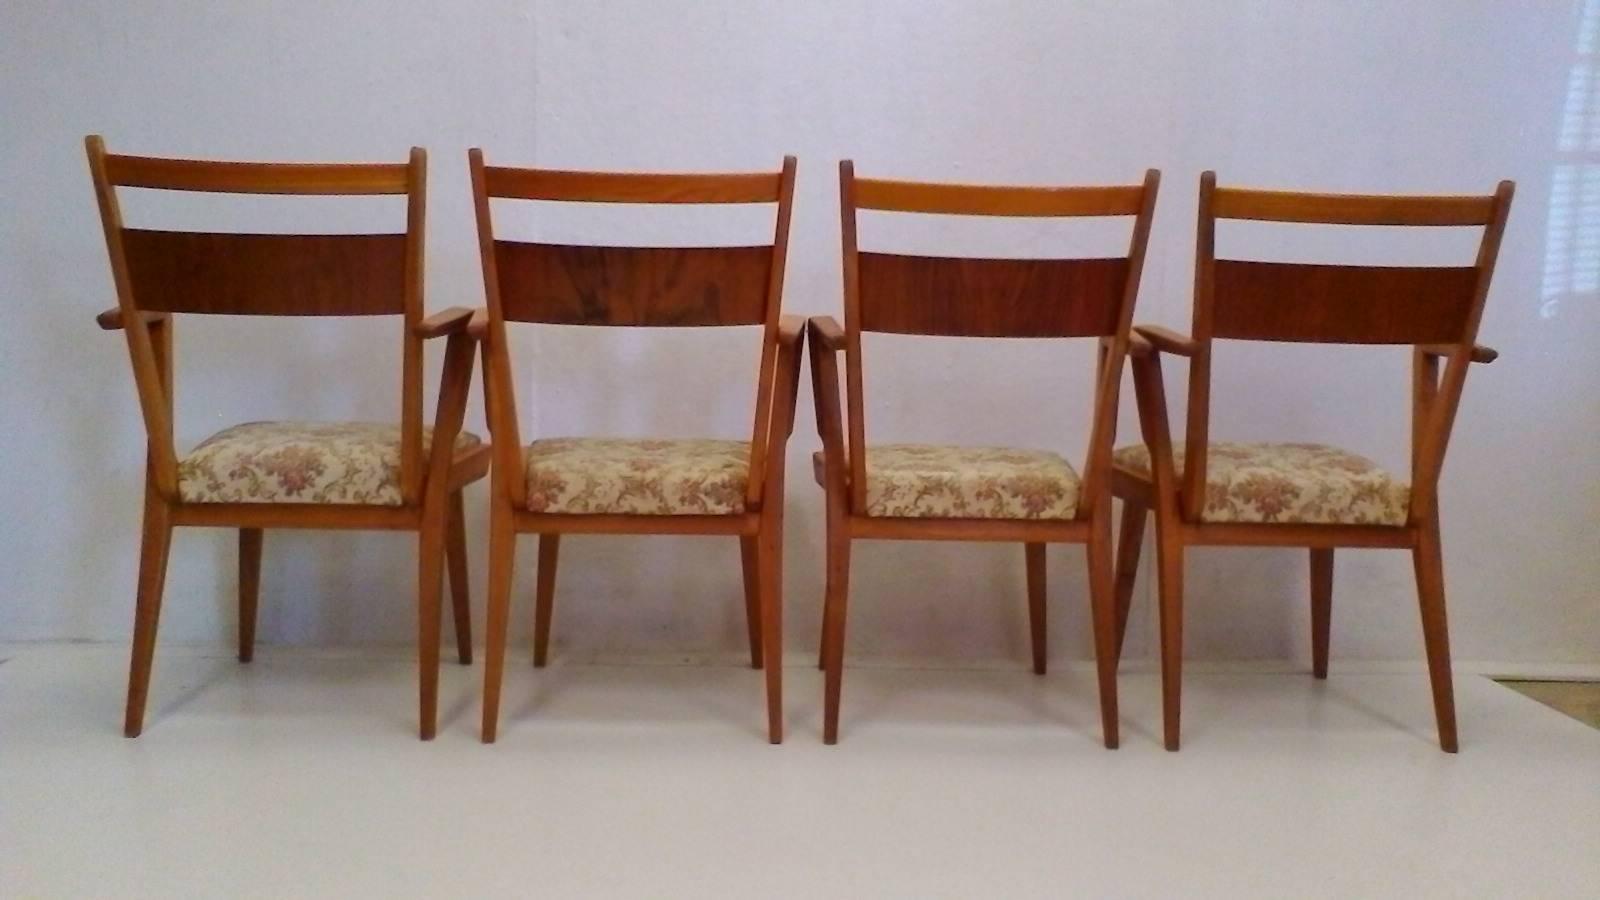 Mid-20th Century Set of Four Wooden Chairs JI-350 with New Upholstery, 1965 For Sale